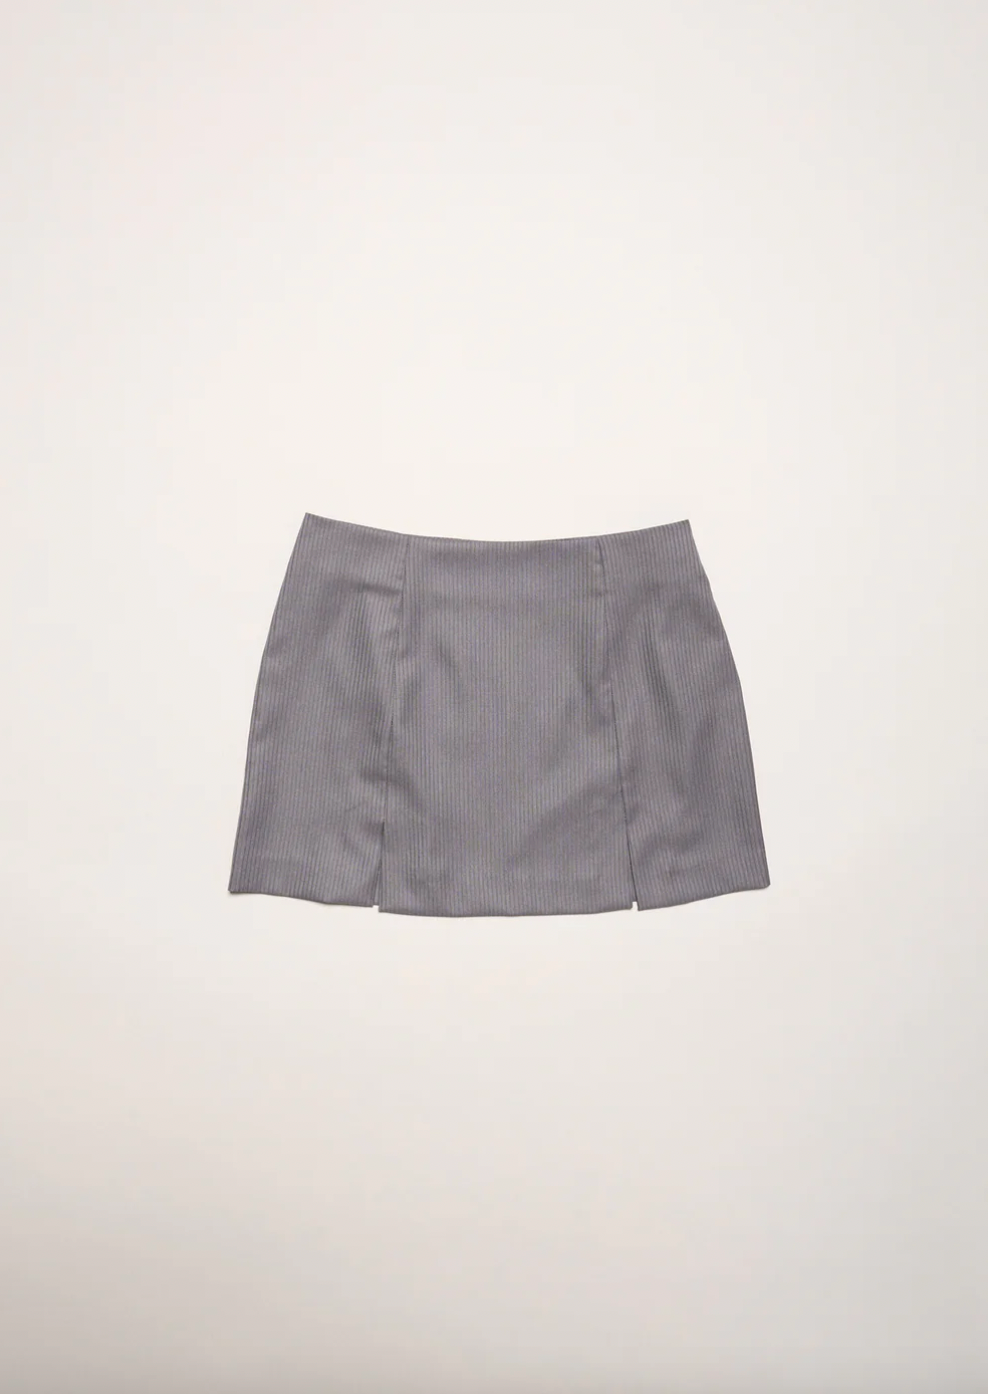 Product Image for All-Day Miniskirt, Grey Pinstripe